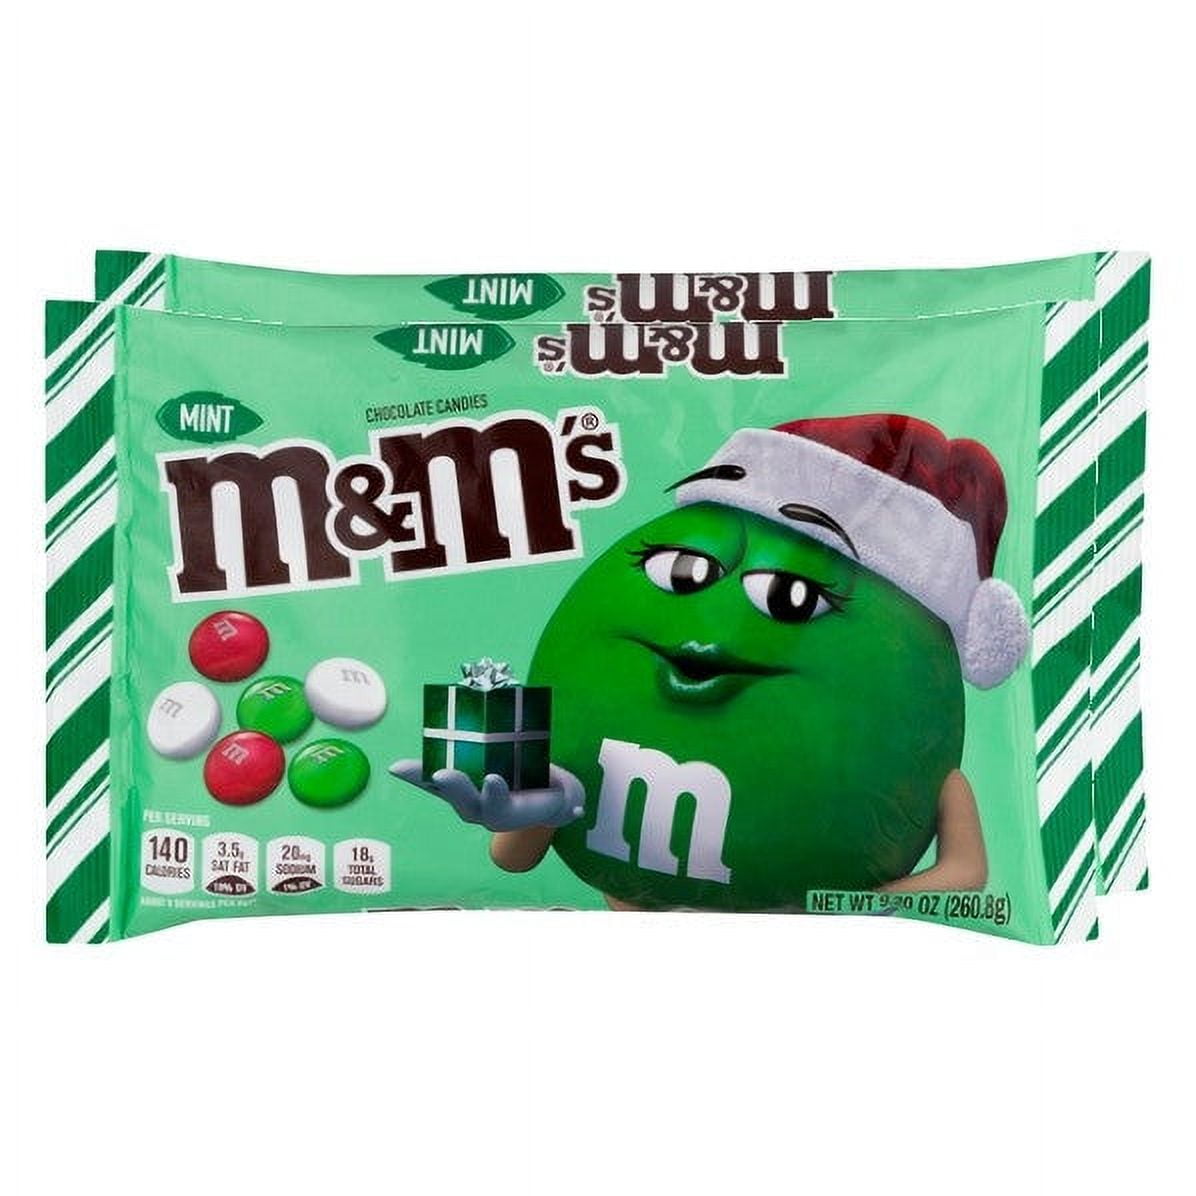 M&M'S Holiday Mint Chocolate Christmas Candy Bag, 9.2 oz - Fry's Food Stores